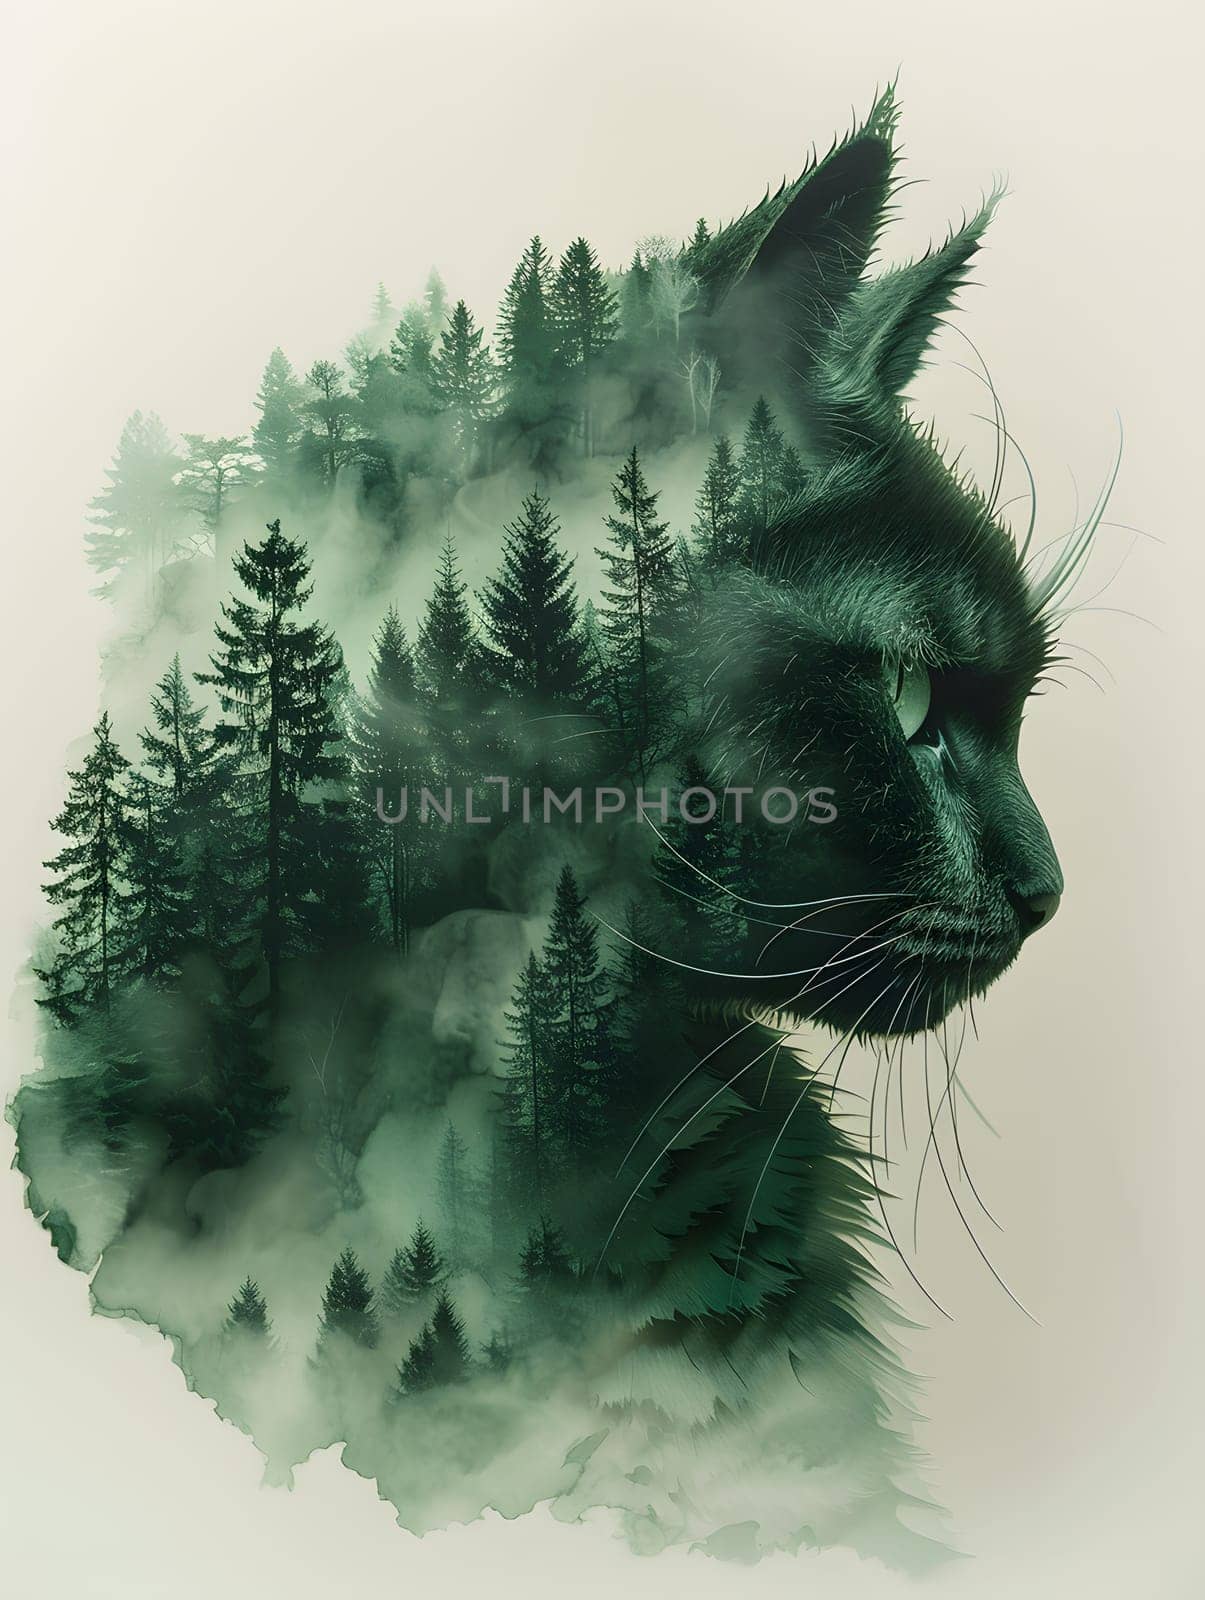 A stunning double exposure painting featuring a Felidae cat with whiskers, snout, and tail, set against a backdrop of trees. The carnivores fur contrasts beautifully with the natural elements